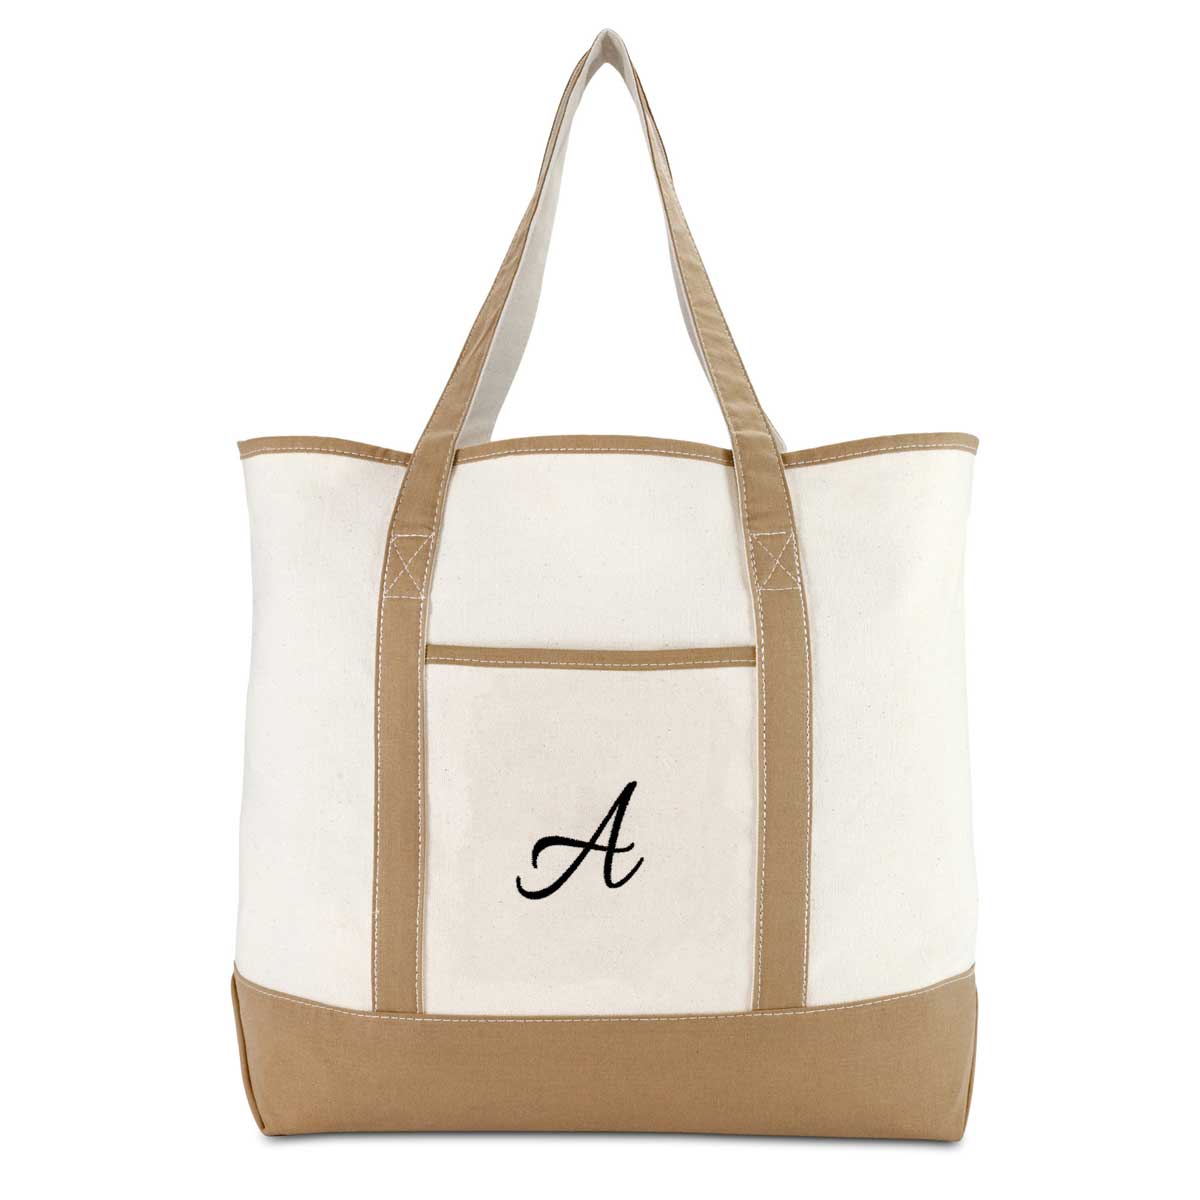 Dalix Medium Personalized Tote Bag Monogrammed Initial Letter - K Red